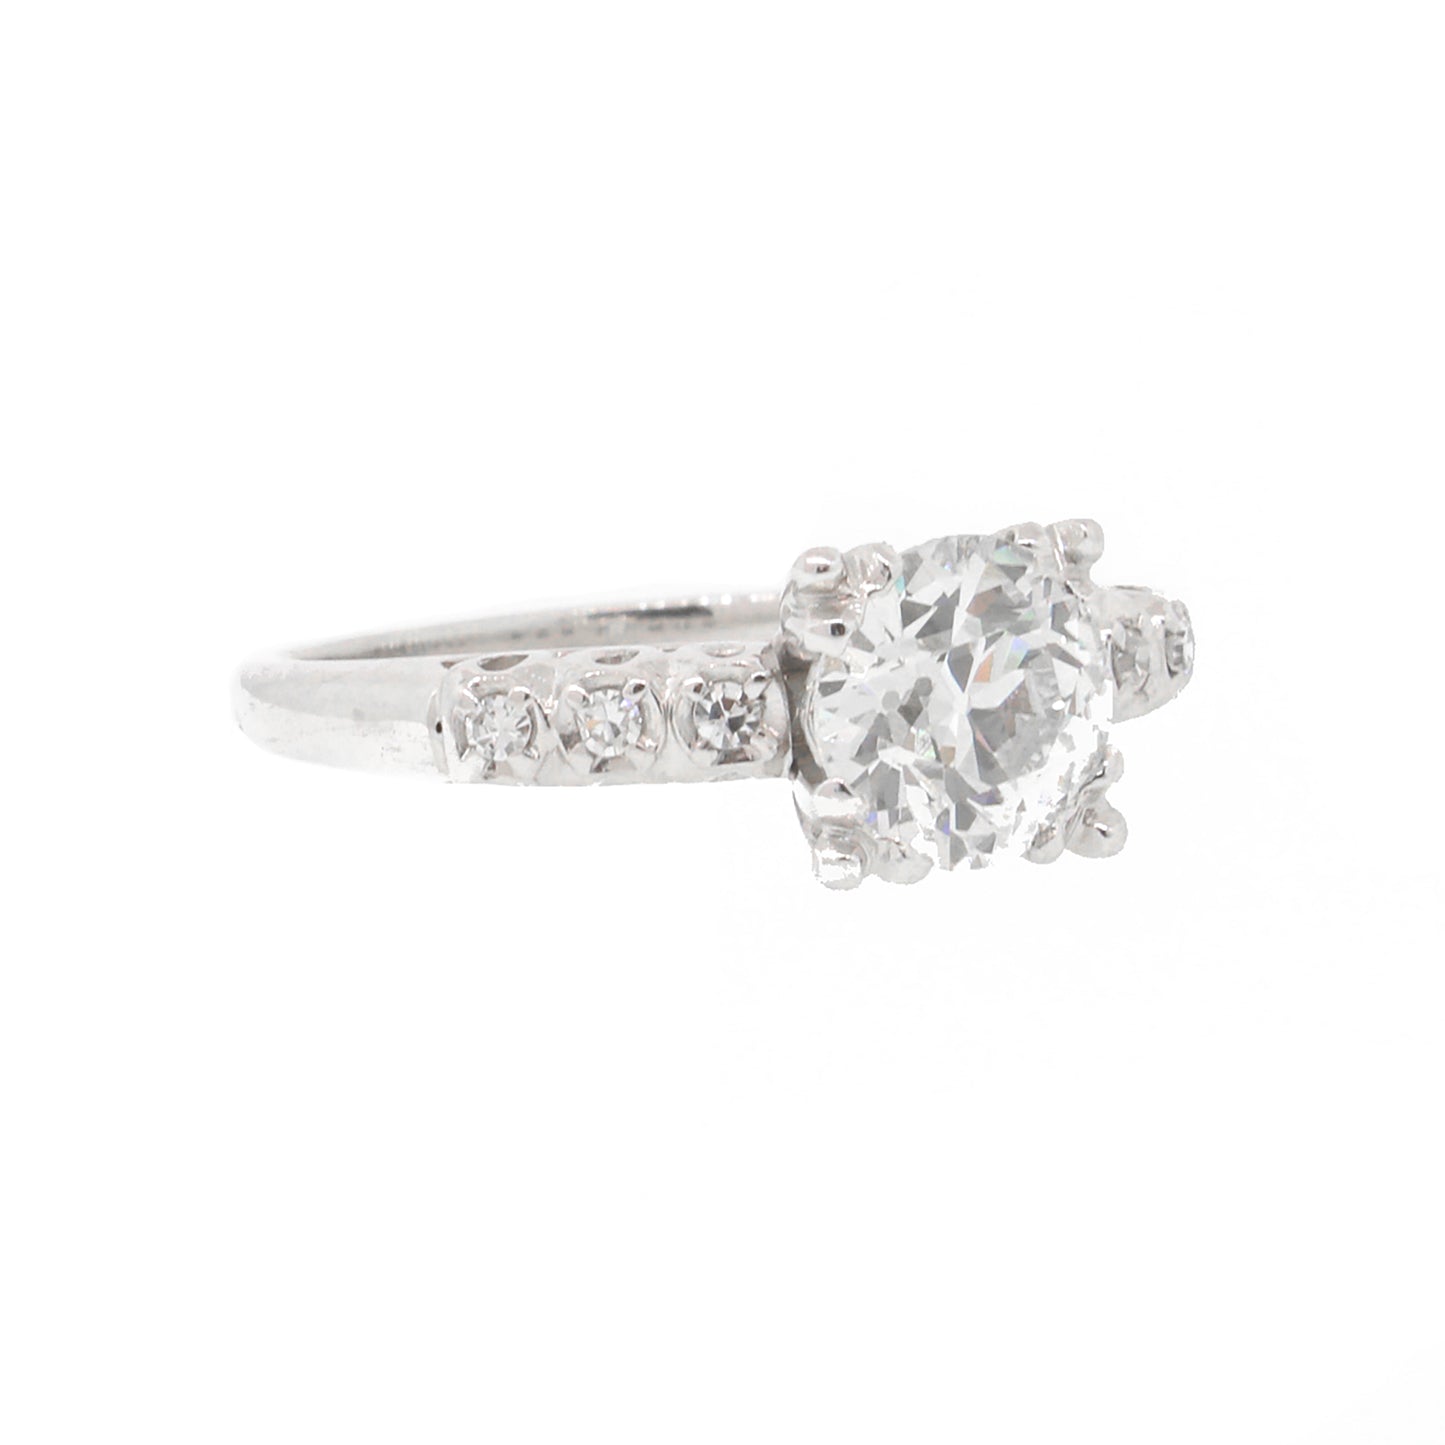 Old Mine Cut Diamond Engagement White Gold Ring